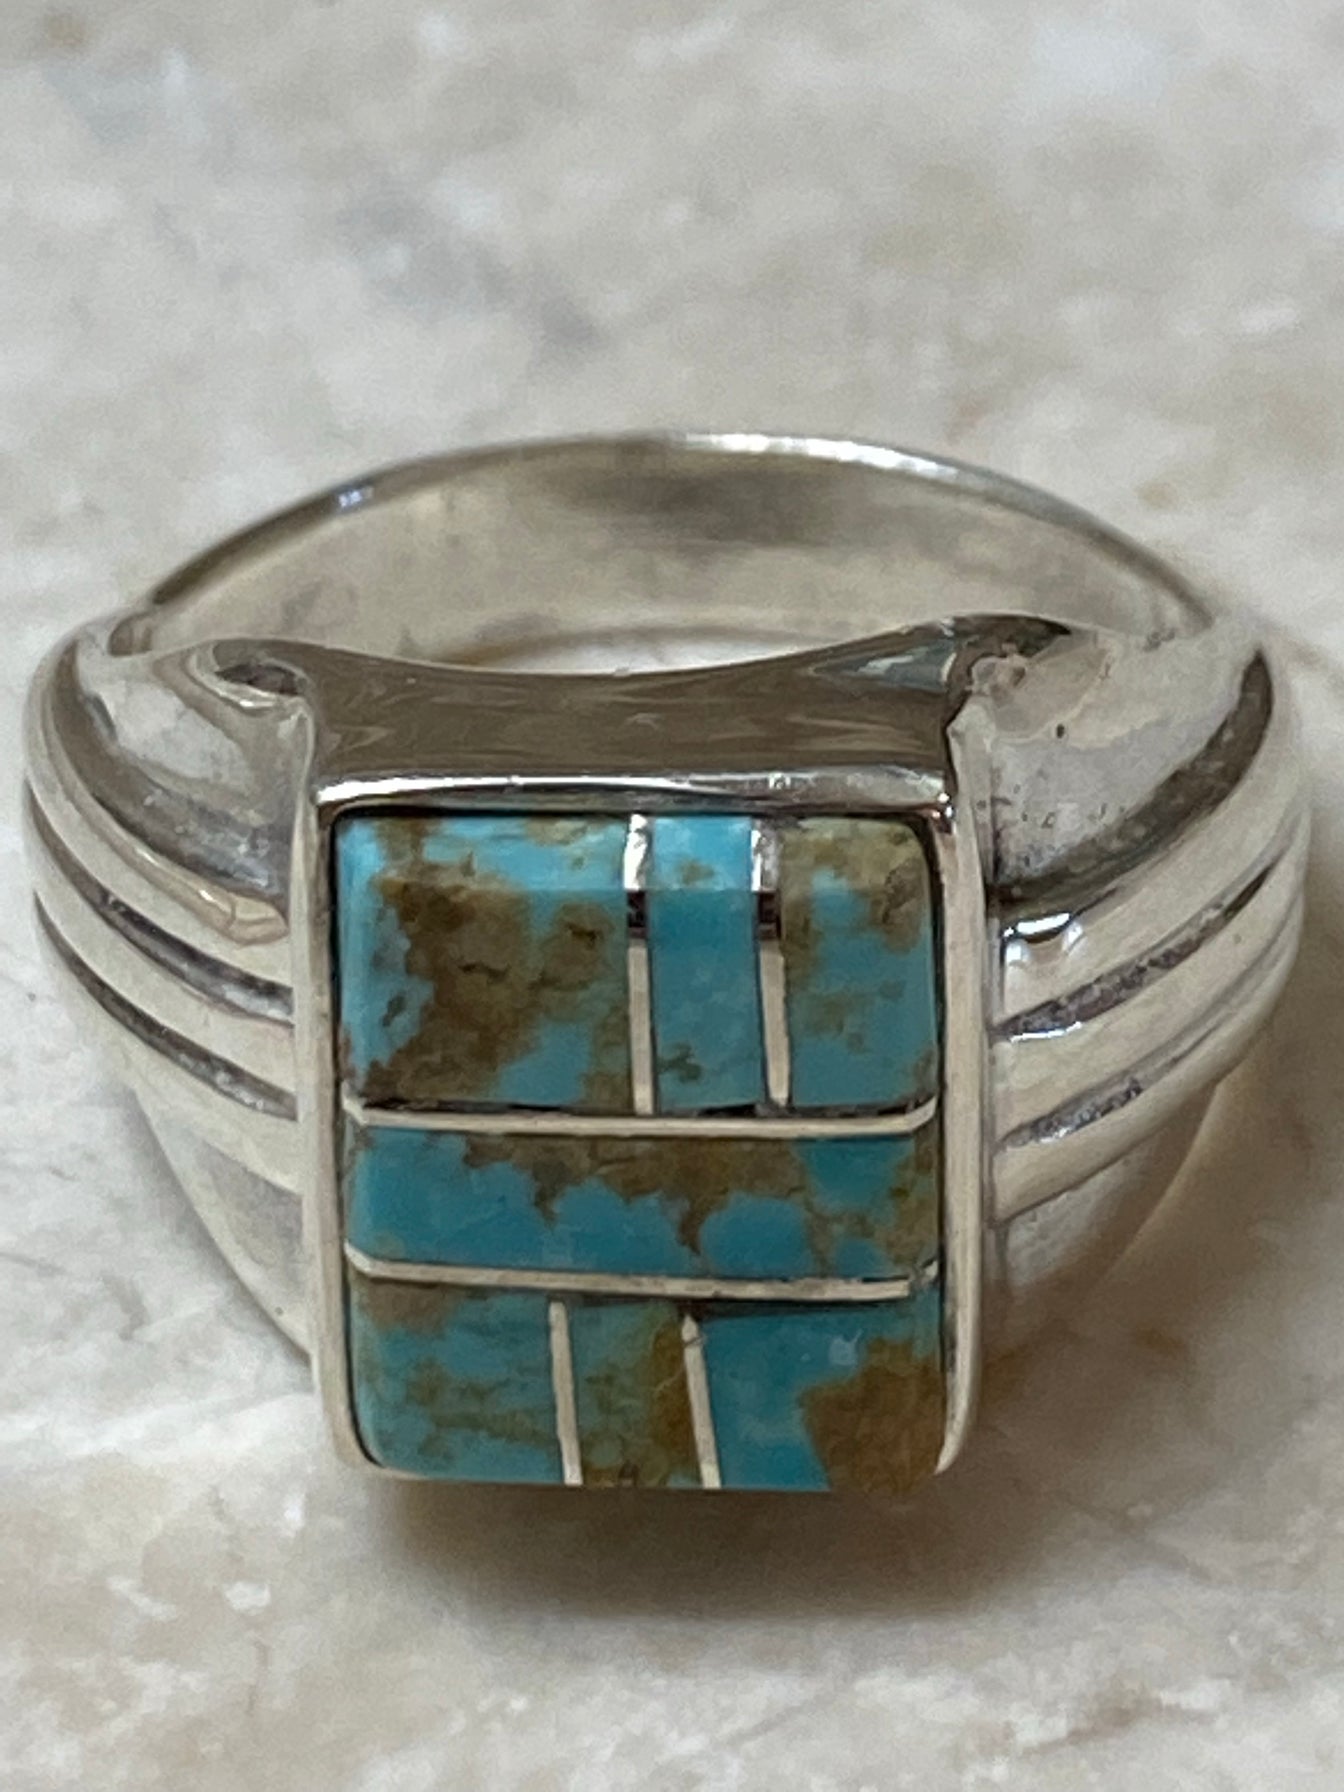 Spider Web Turquoise #8 & Sterling Silver Rectangle Signet Ring Size 11.75